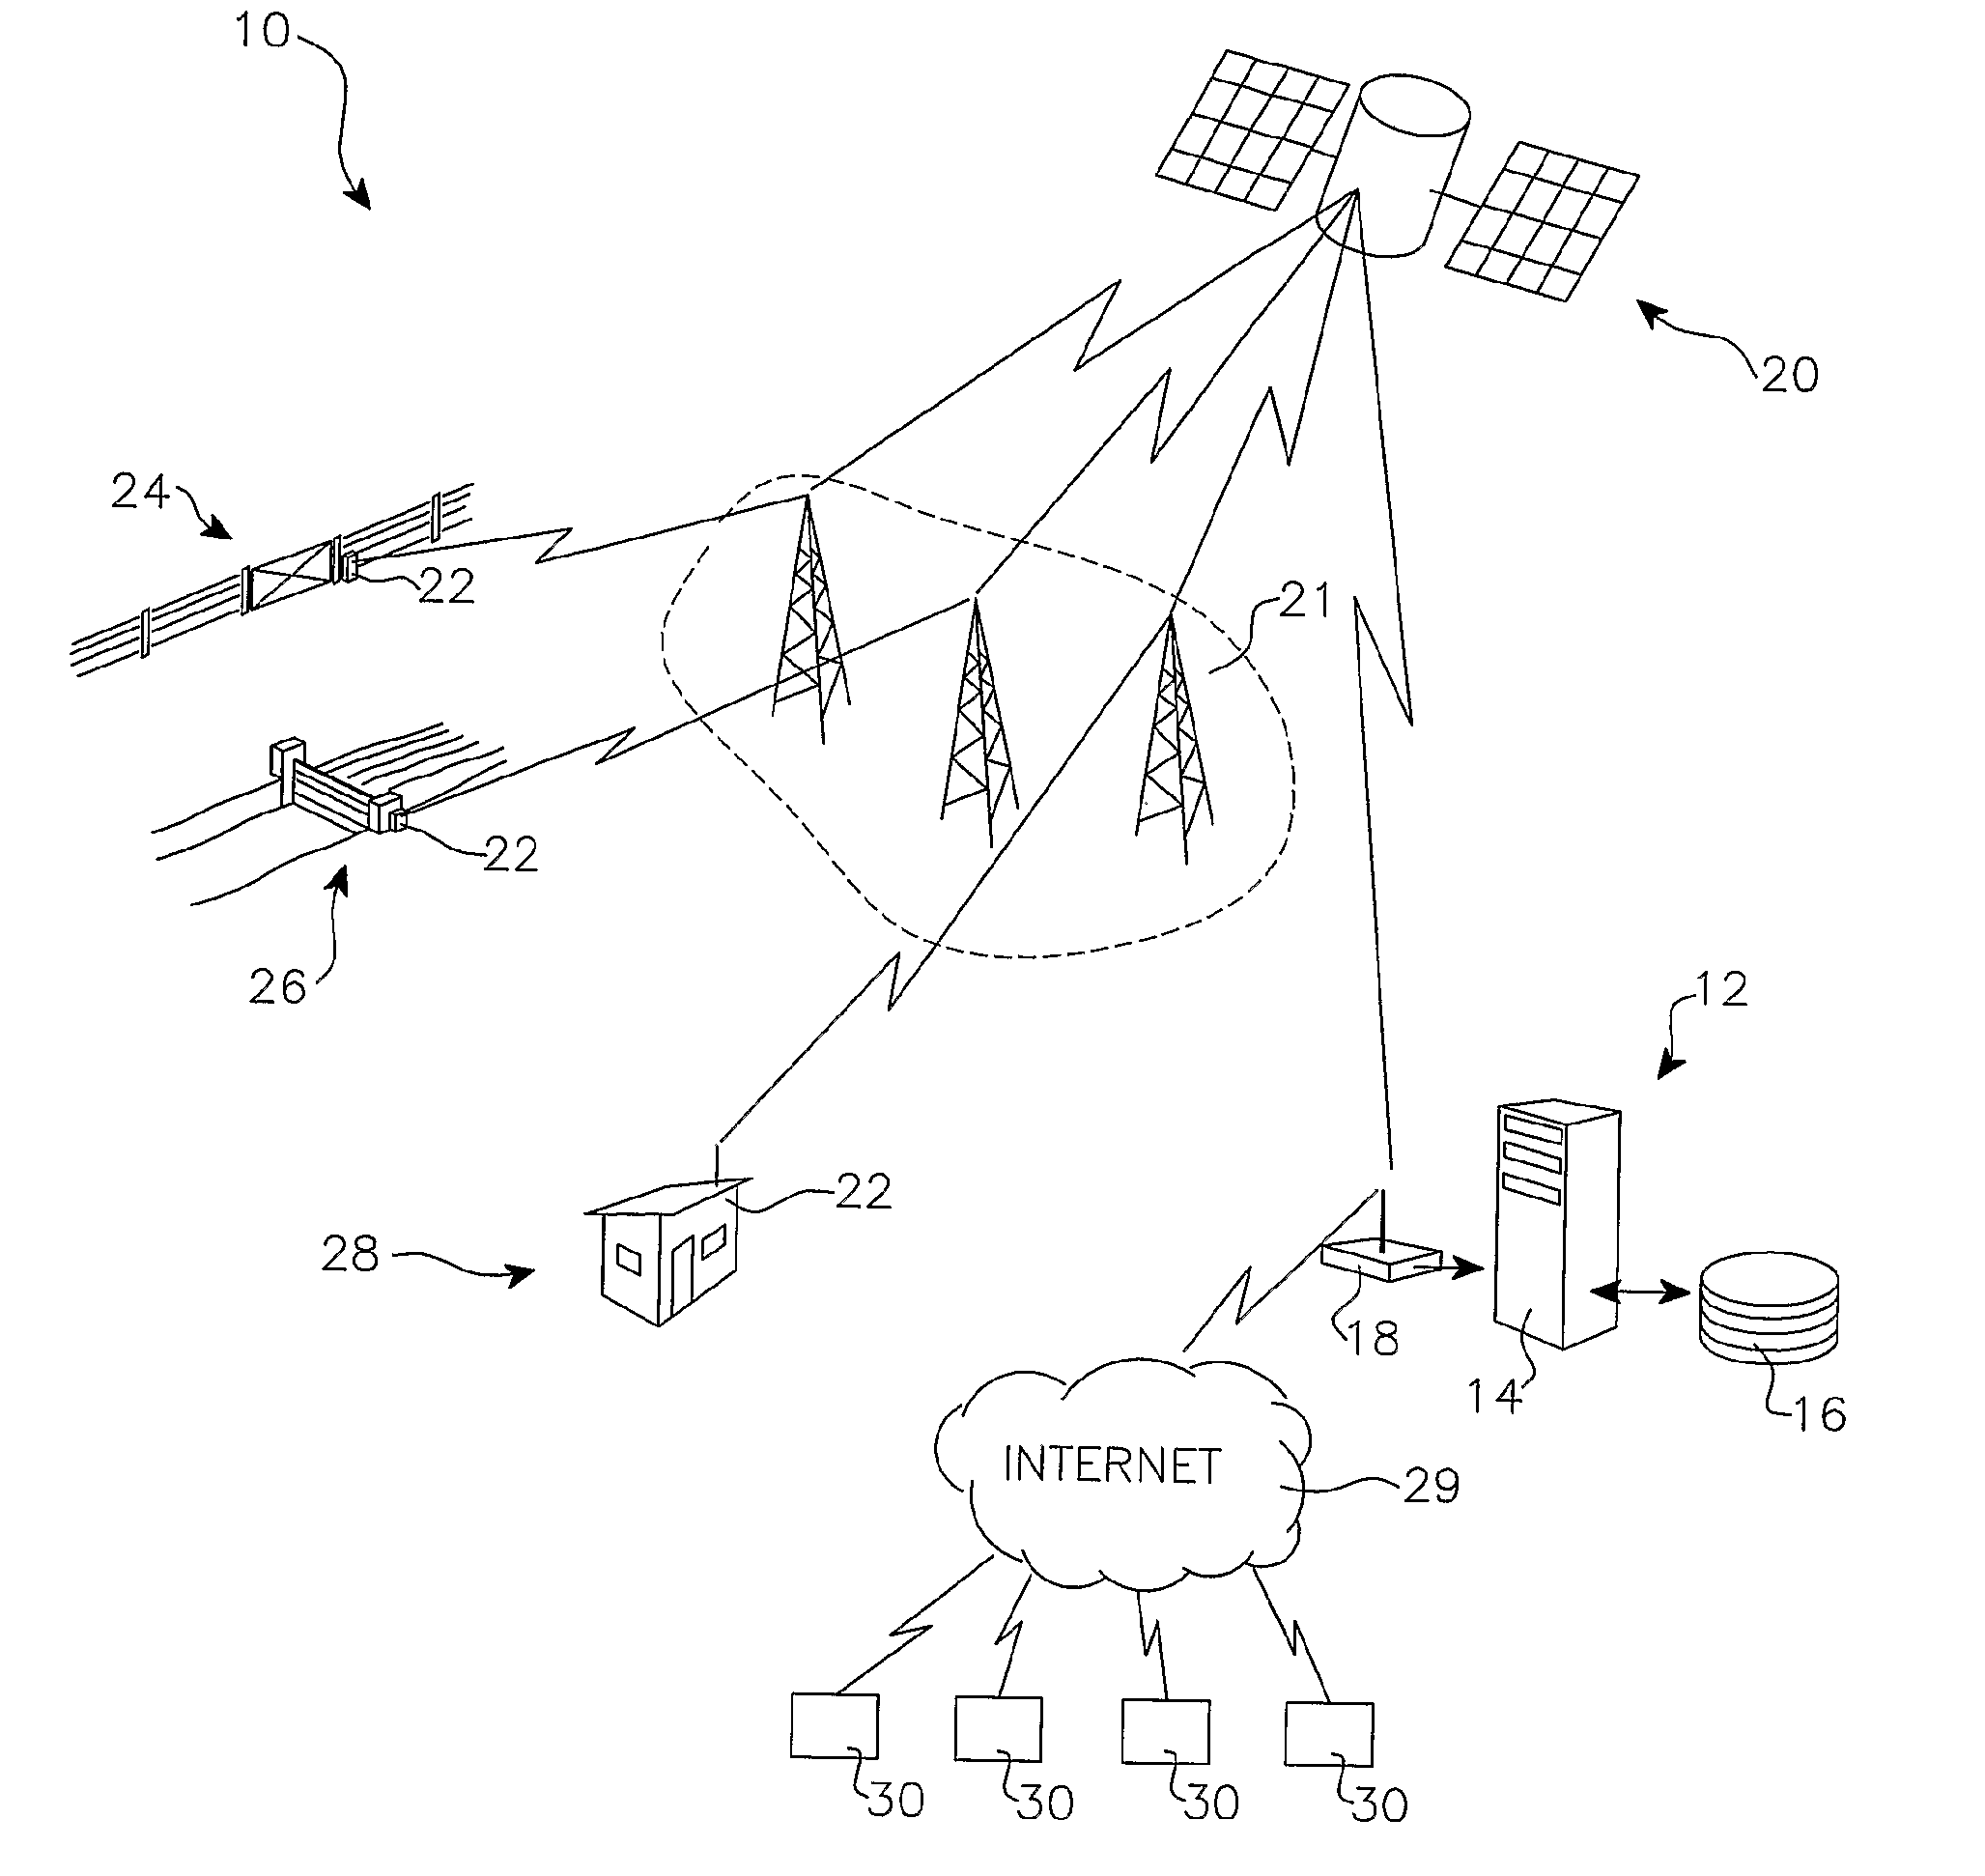 Monitoring apparatus and system